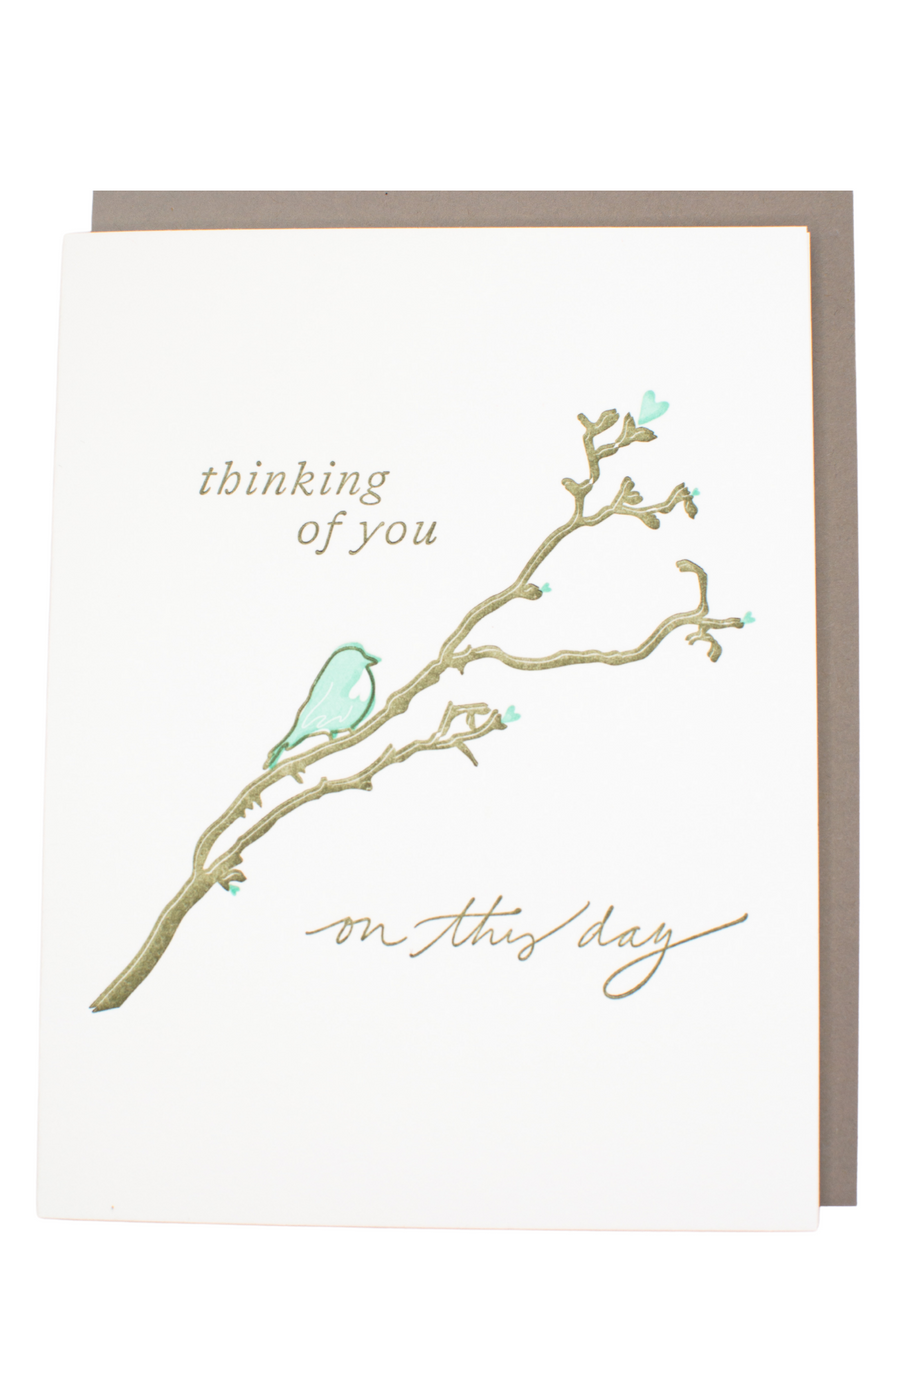 A small blue bird perched on a tree. The text says Thinking of You on This Day.